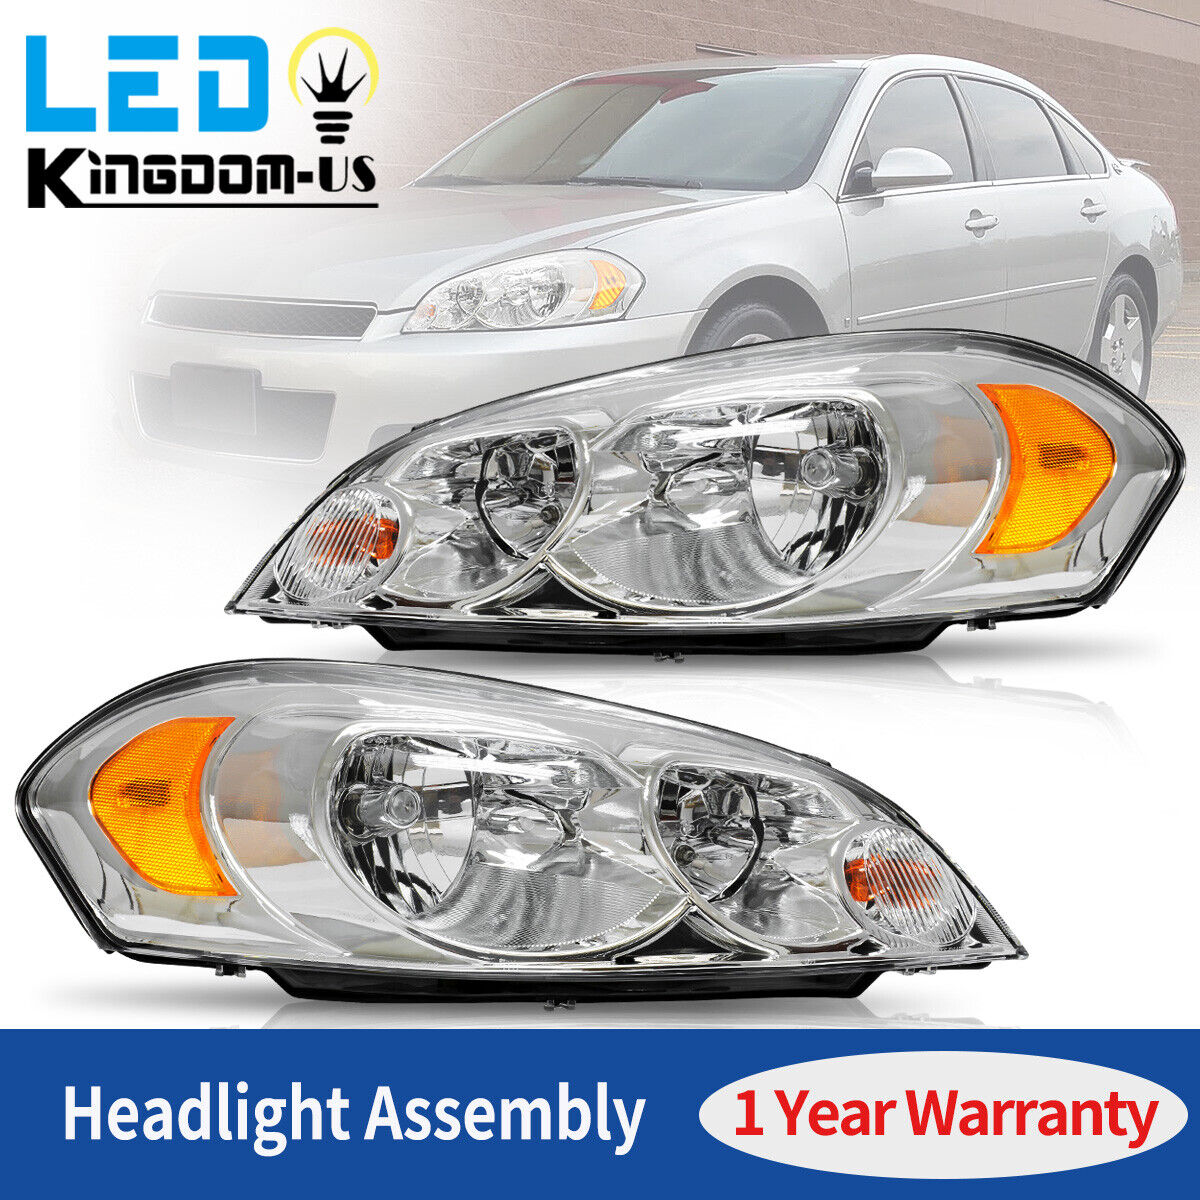 Chrome Amber Headlights Assembly For 09 Chevy Impala 06 07 Monte Carlo Headlamps